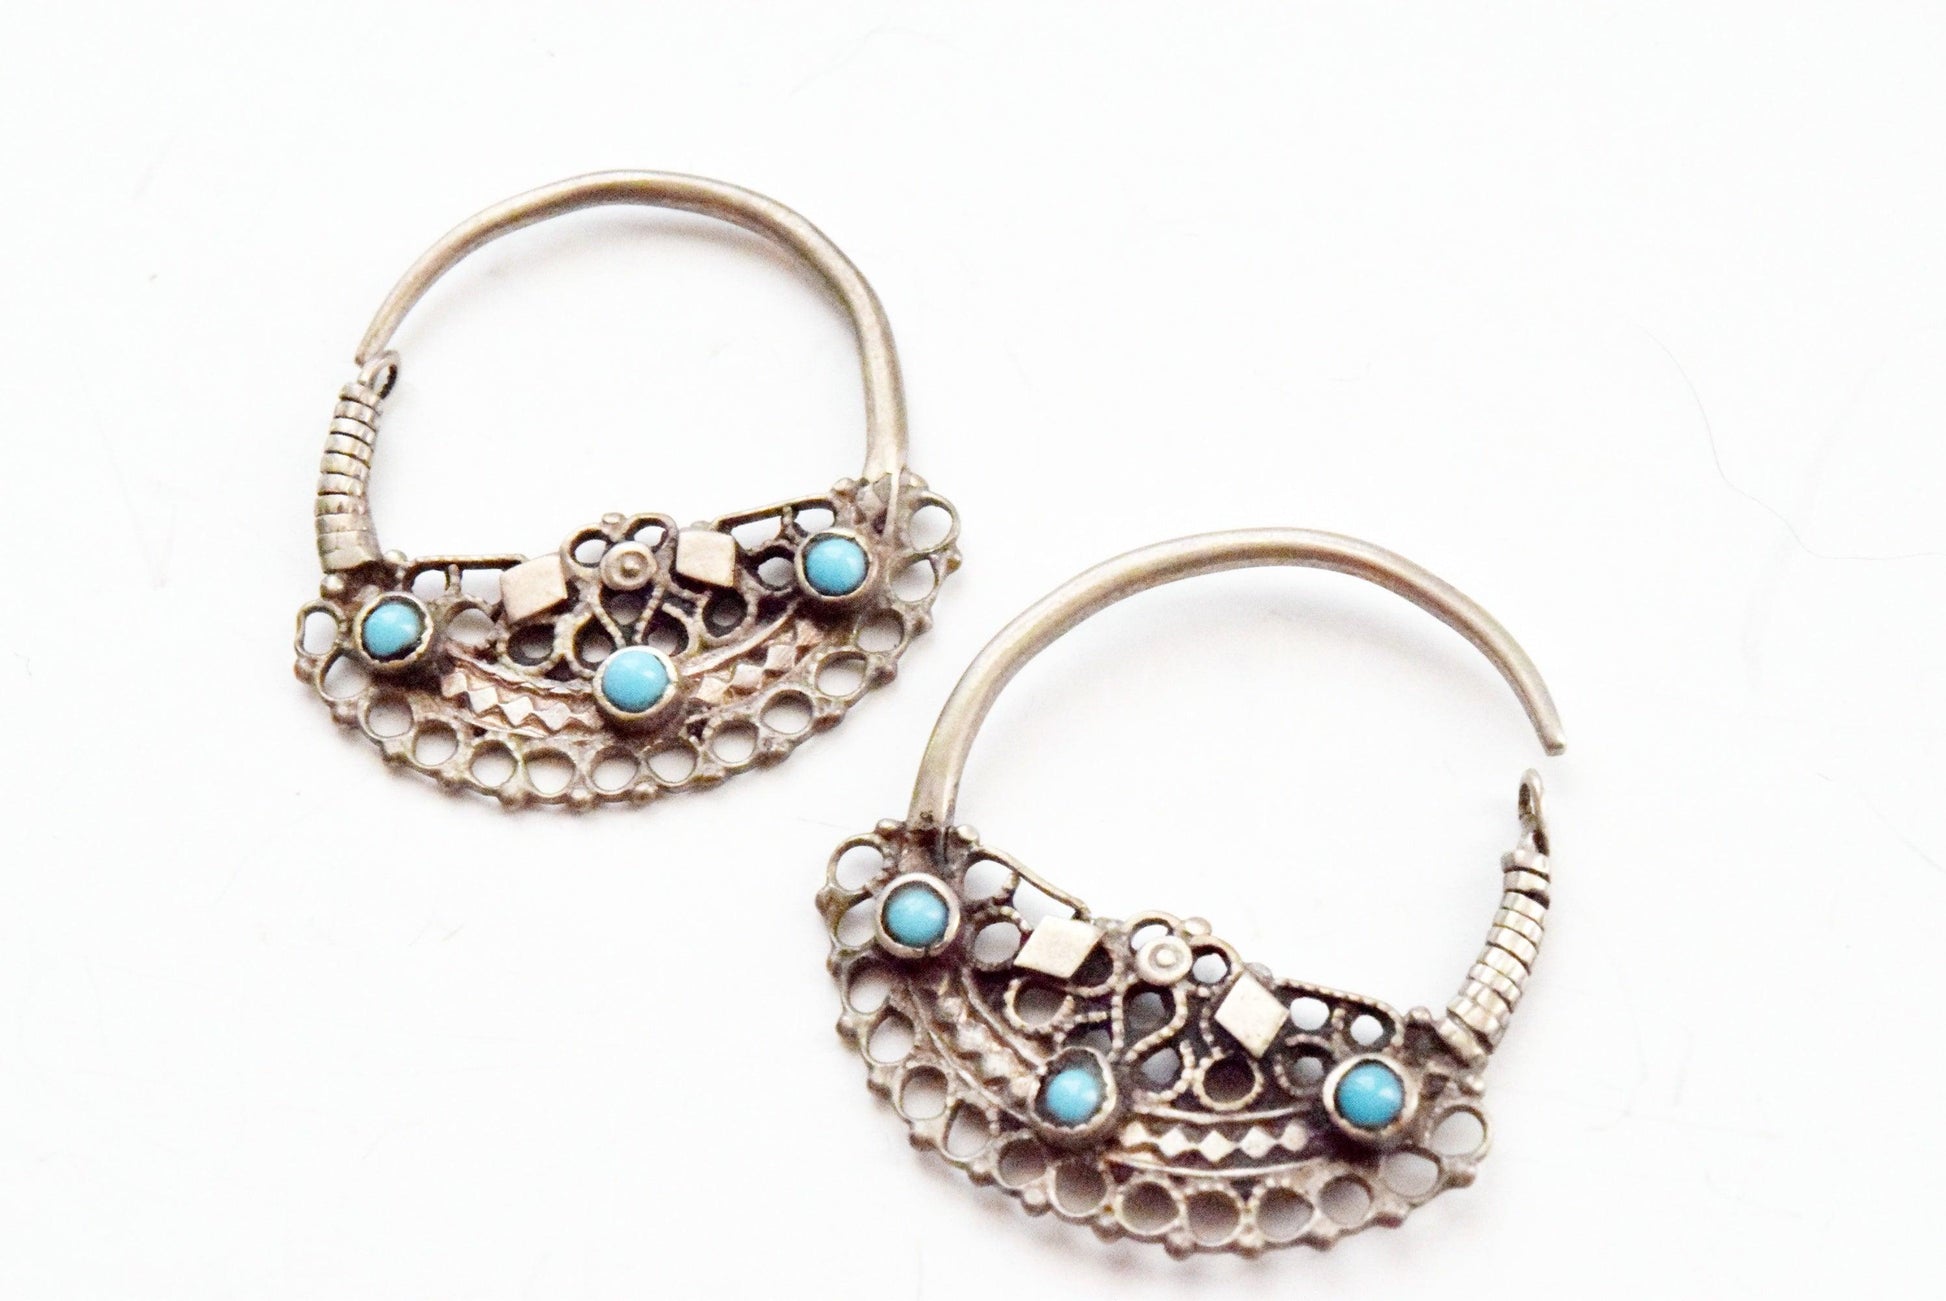 Vintage Small Silver Pashtun Hoop Earrings with Blue Stones - Anteeka